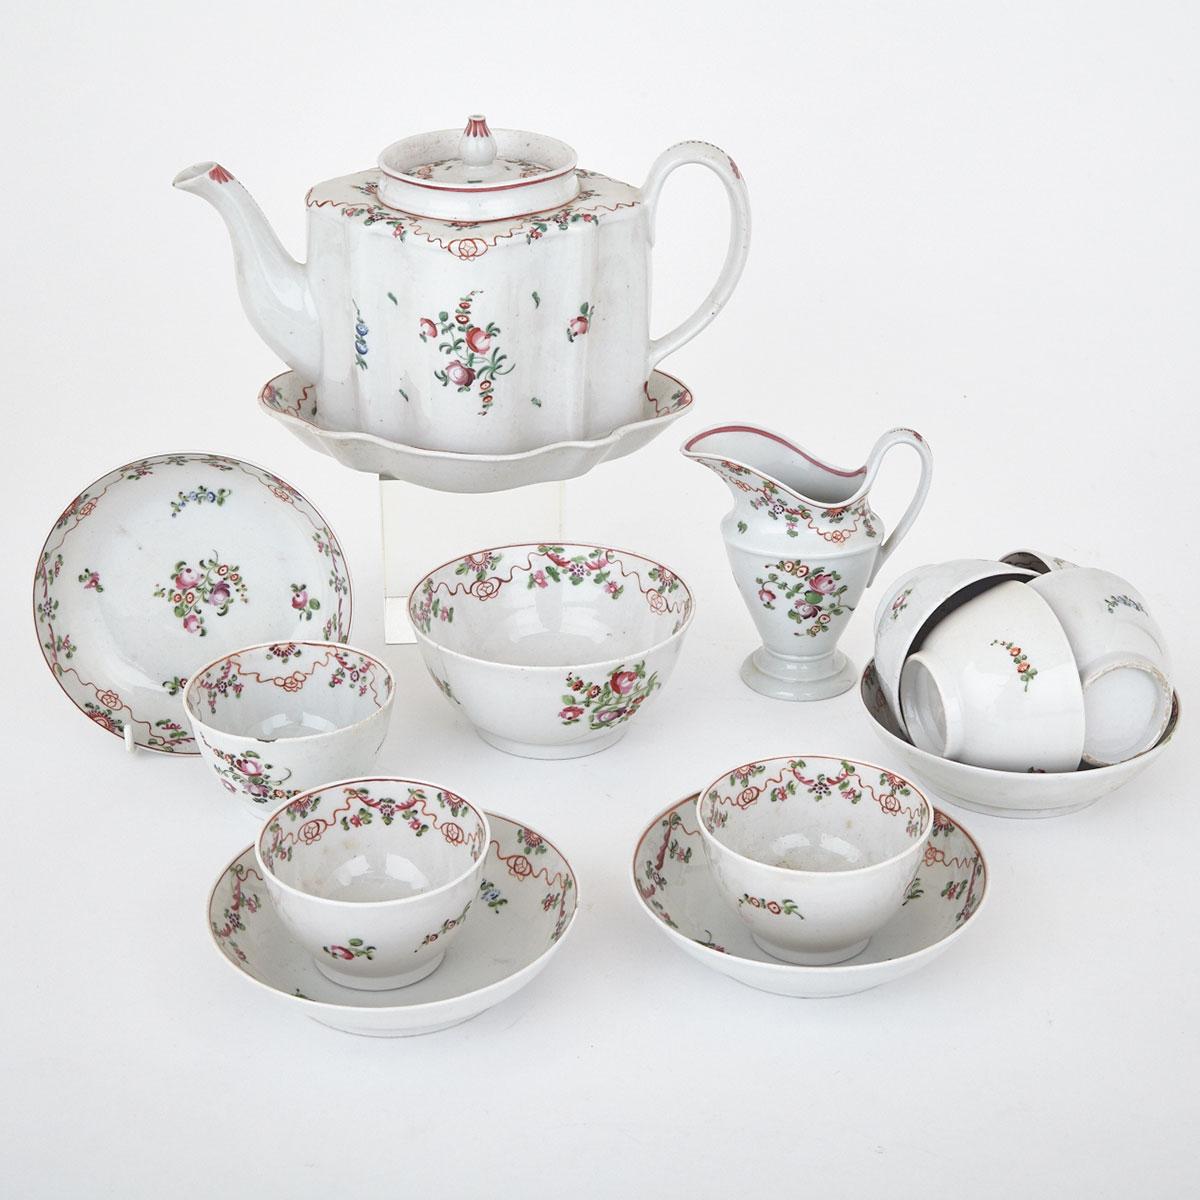 Newhall Tea Service, late 18th century